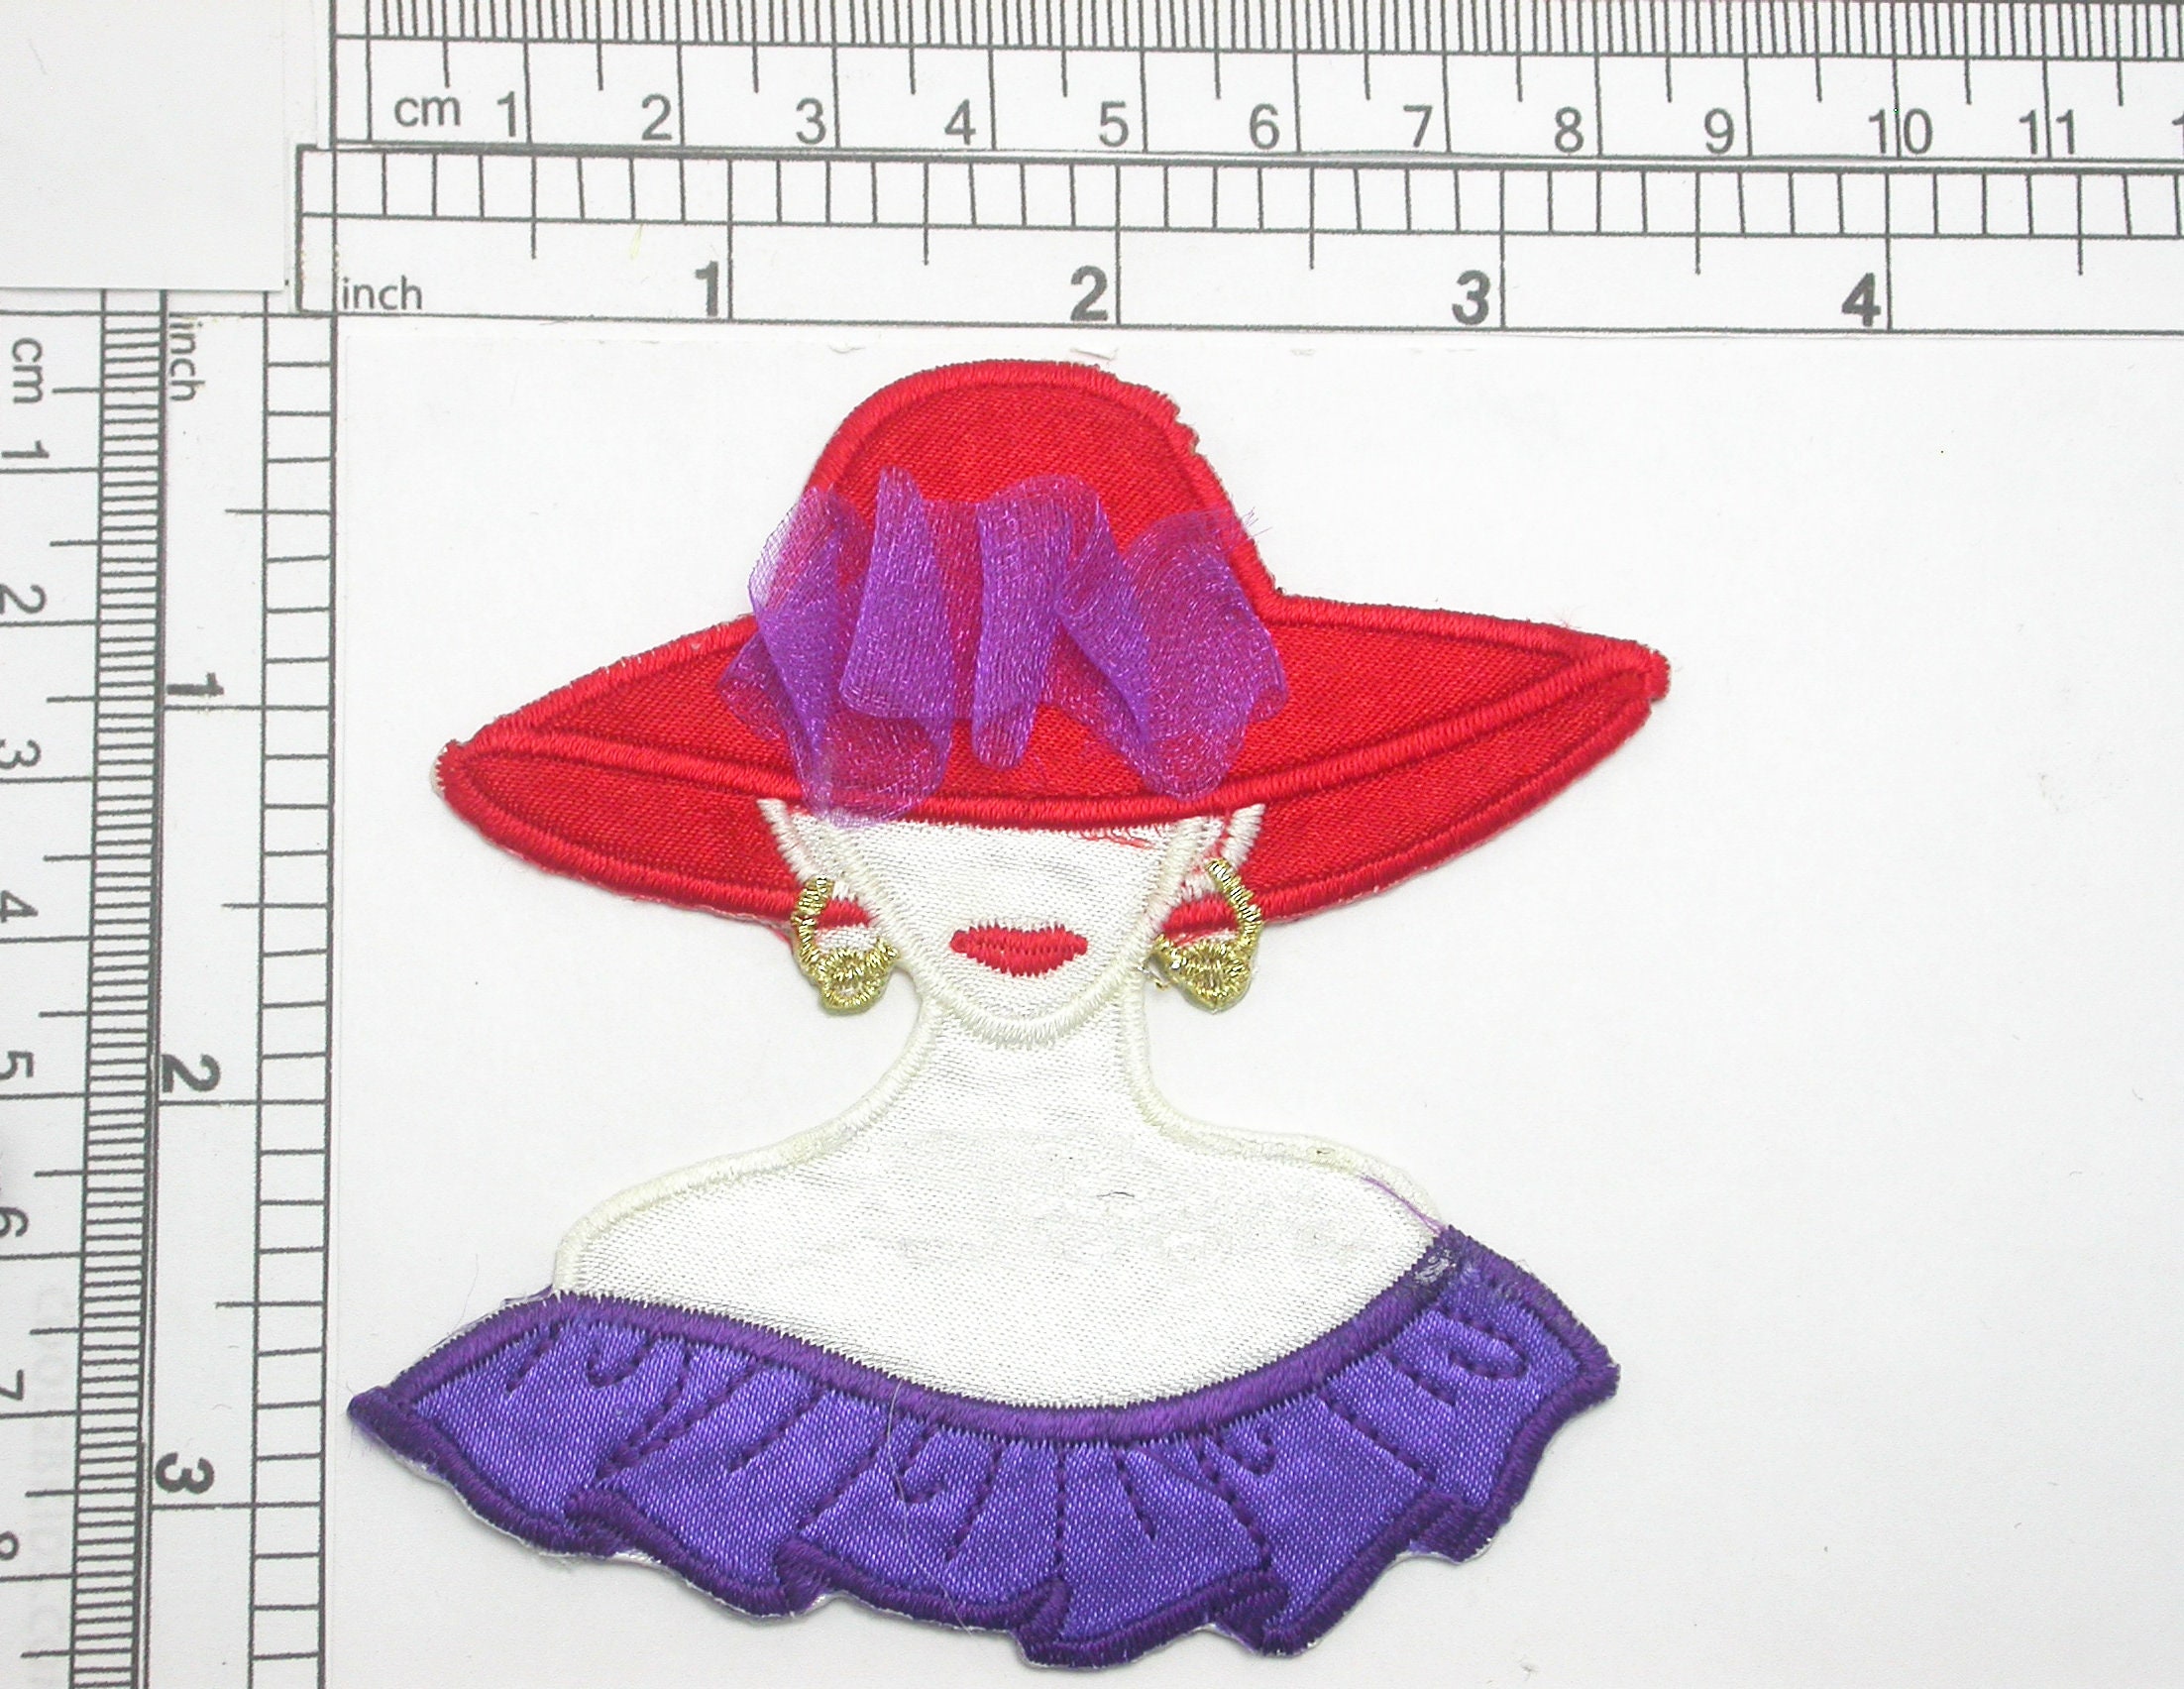 HAT SHOES BAG RED HAT LADY PATCH FLIP FLOPS EMBROIDERED IRON ON APPLIQUE